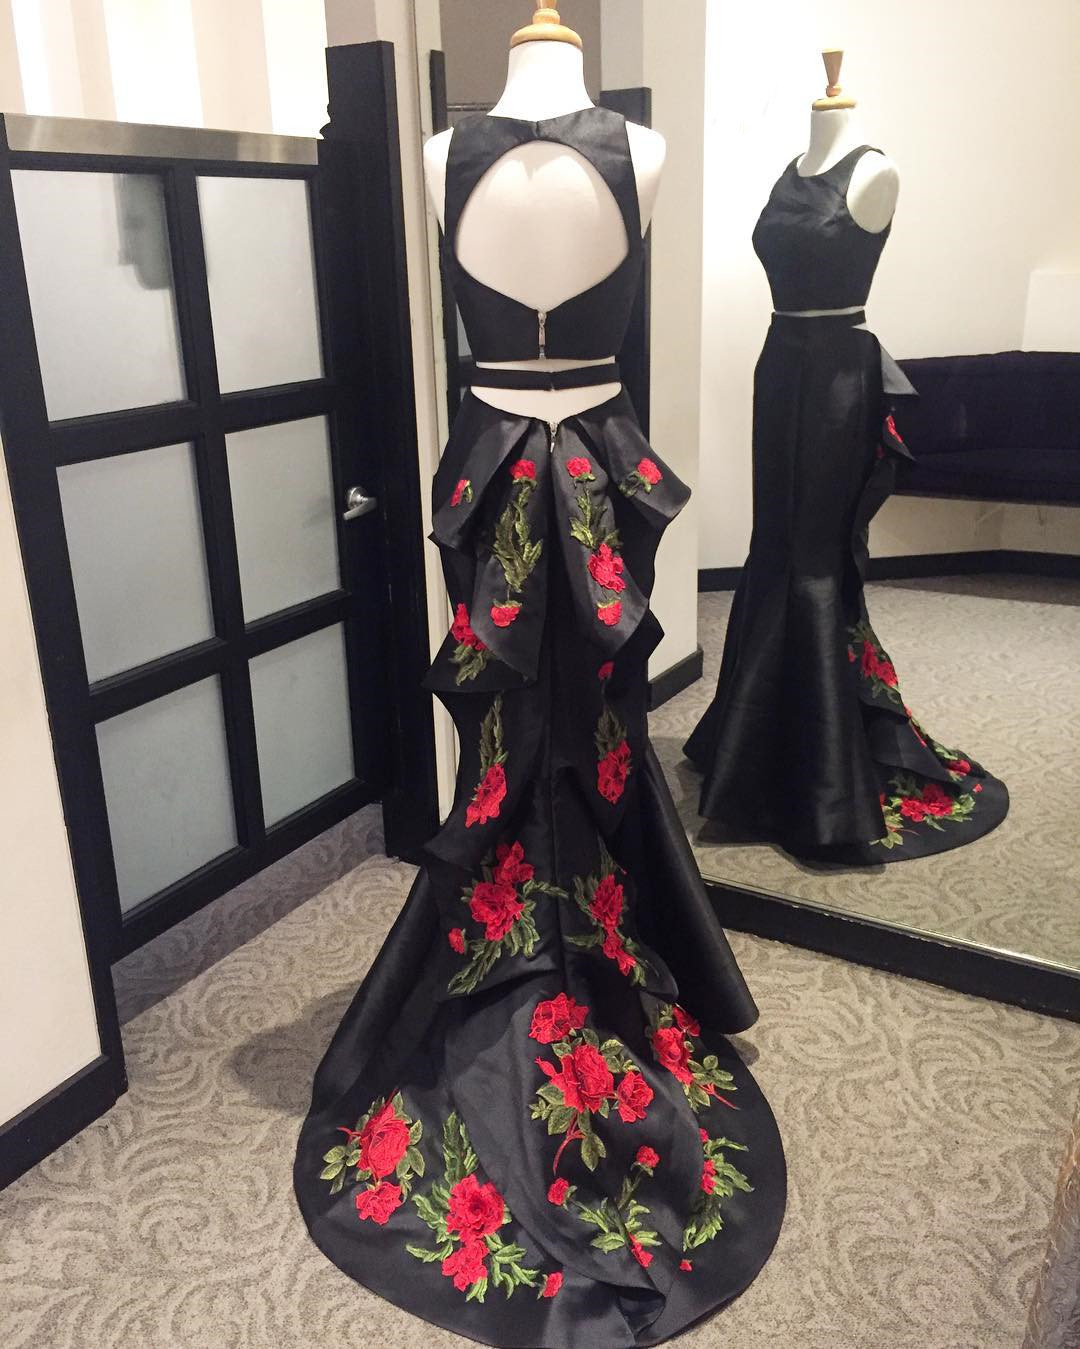 black dress with red roses prom